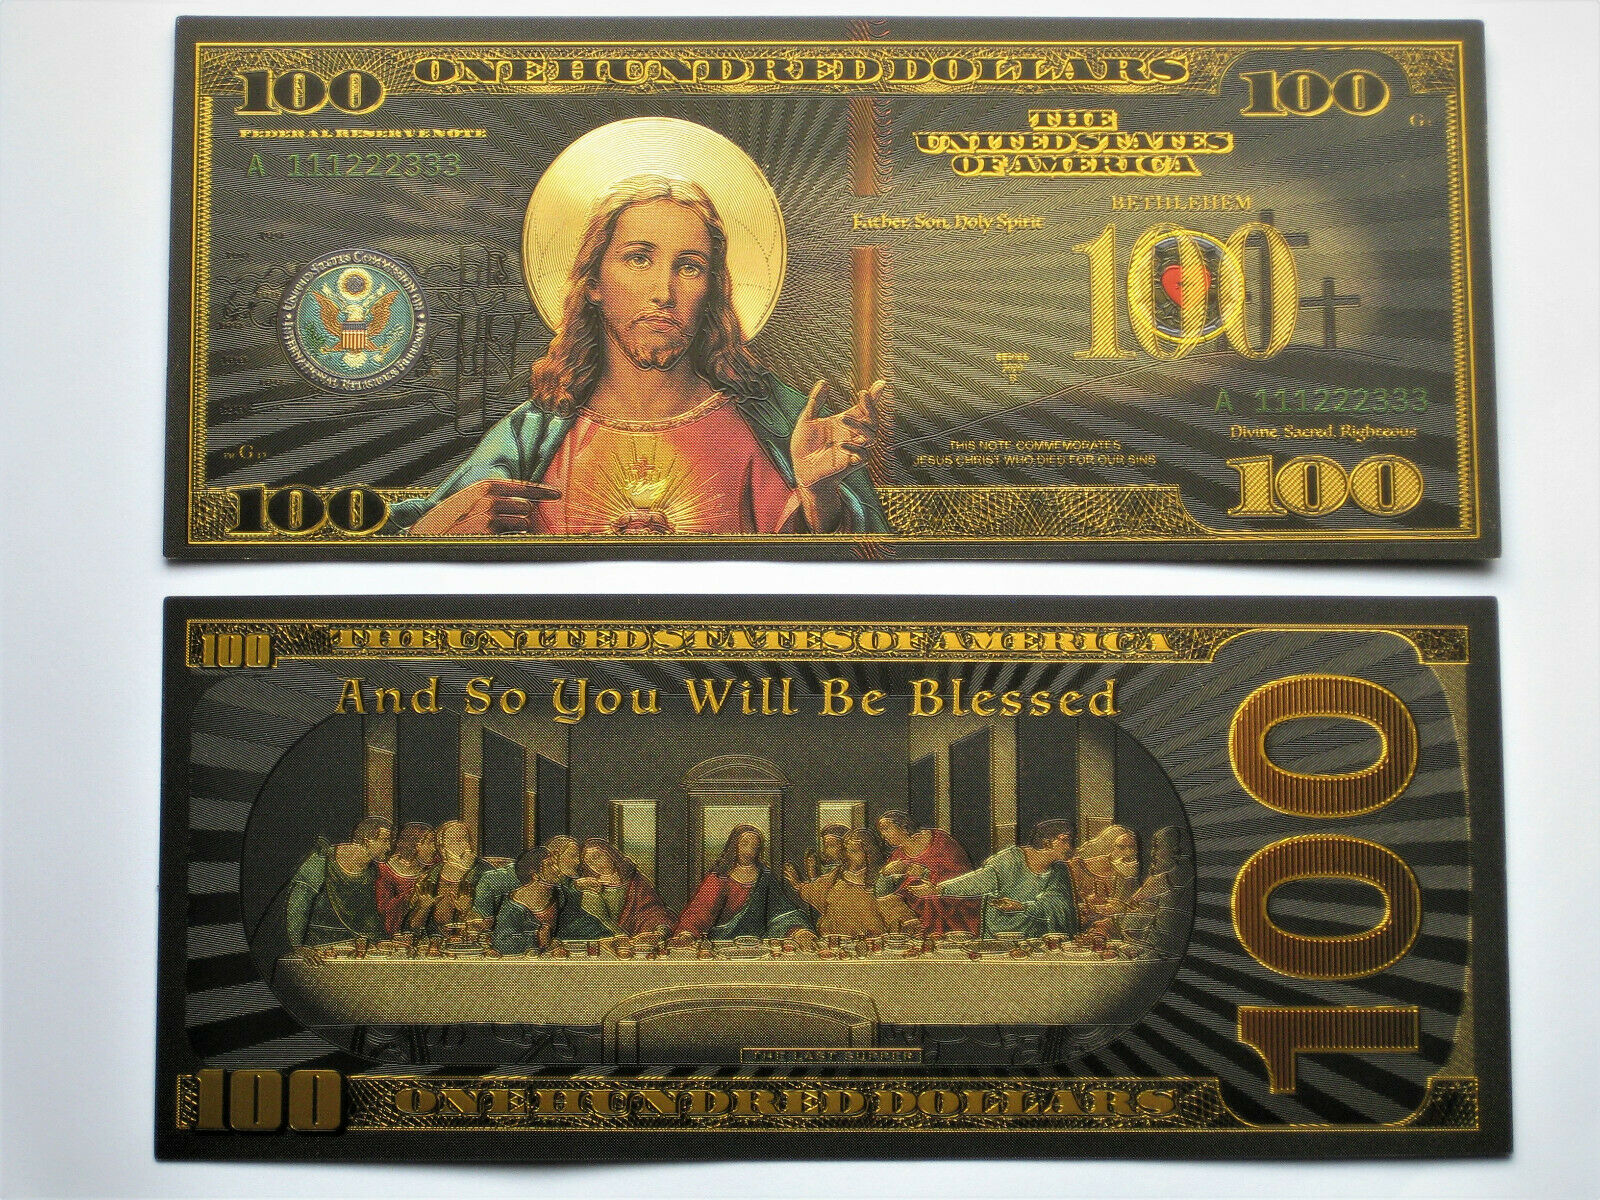 2 Black Gold Banknotes Last Supper Coins Non Paper Bill Federal Religious Jesus